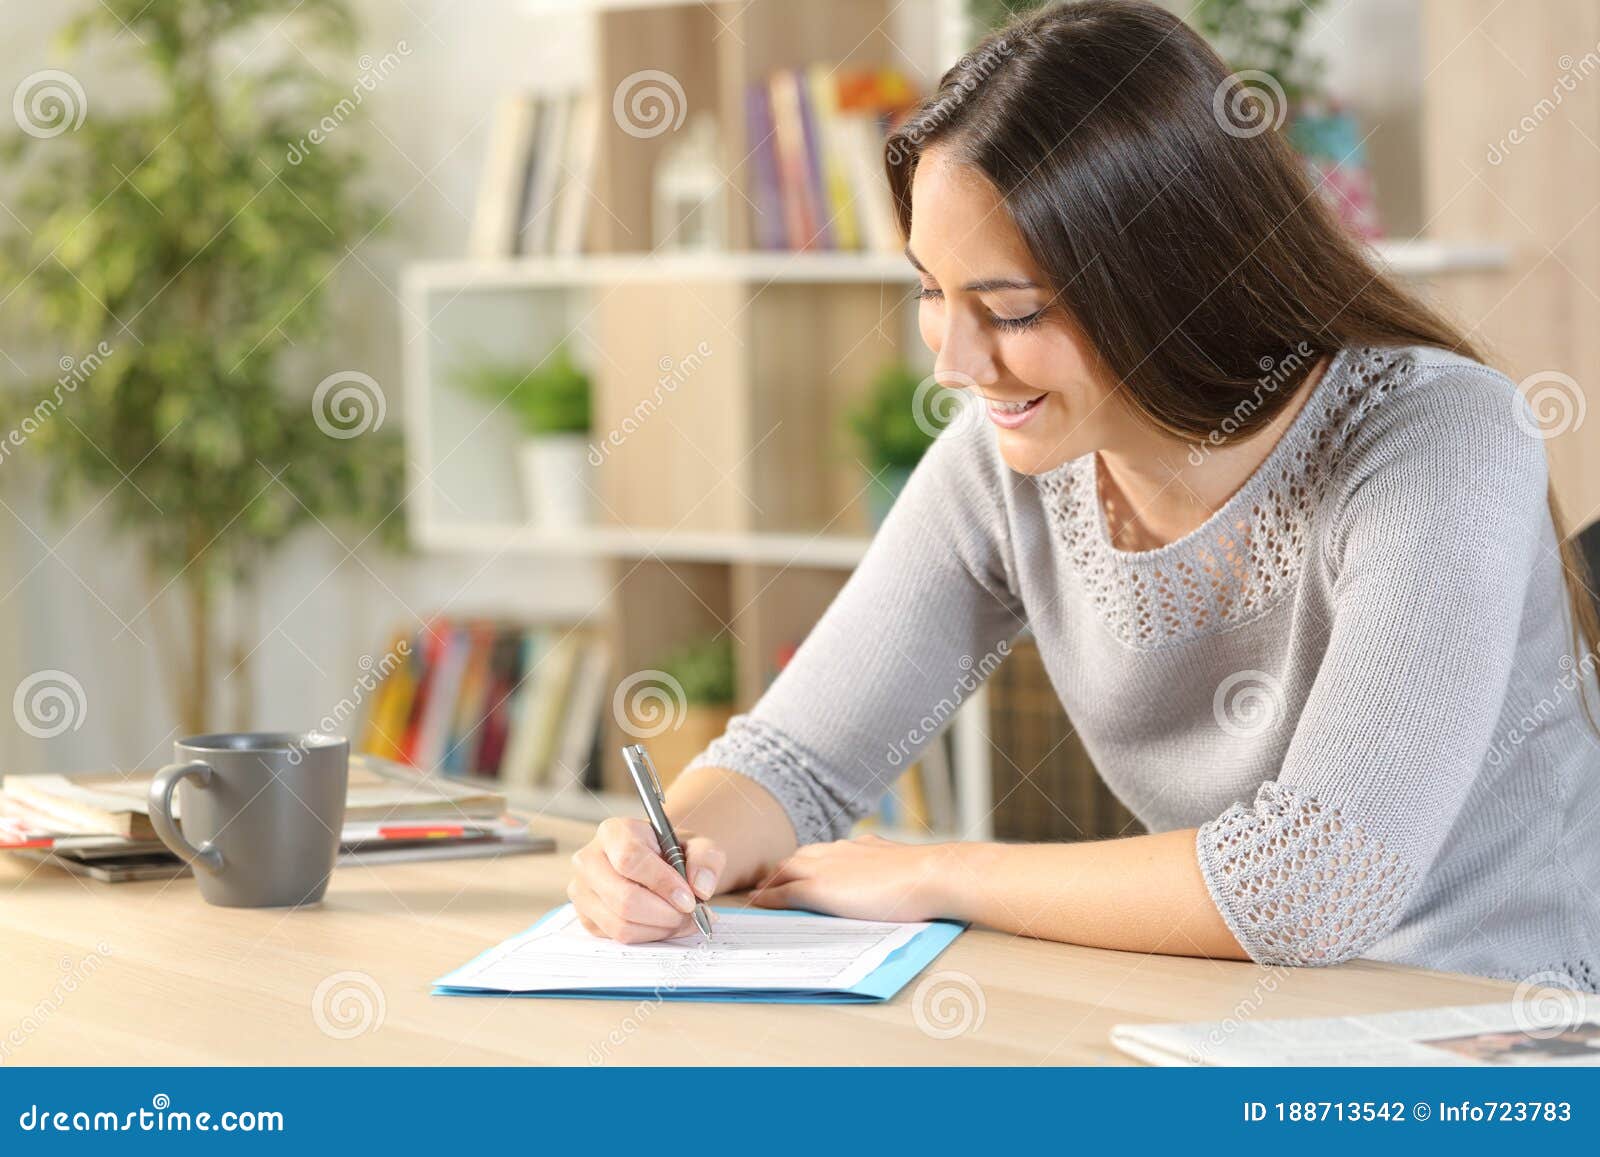 happy woman filling out form on a desk at home